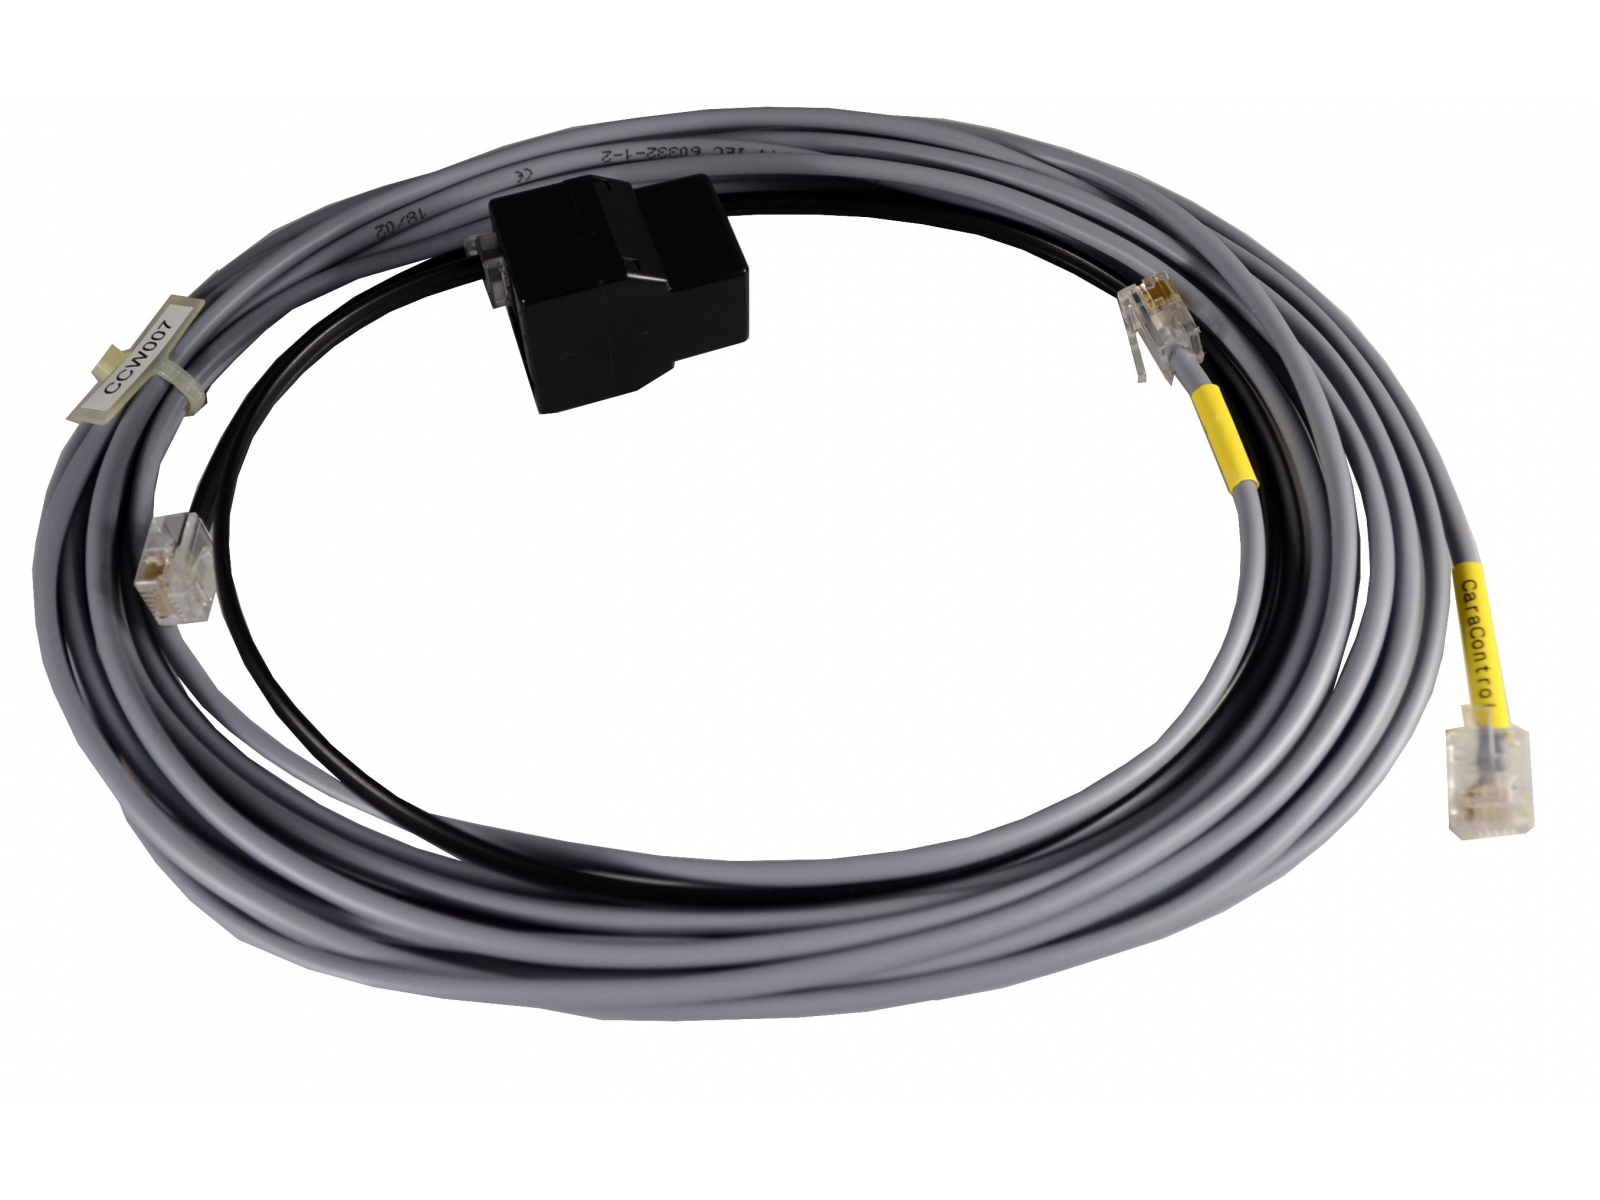 Dometic PerfectView PV-CCBL - Trailer cable set including SPK 170 and 20 m  system cable